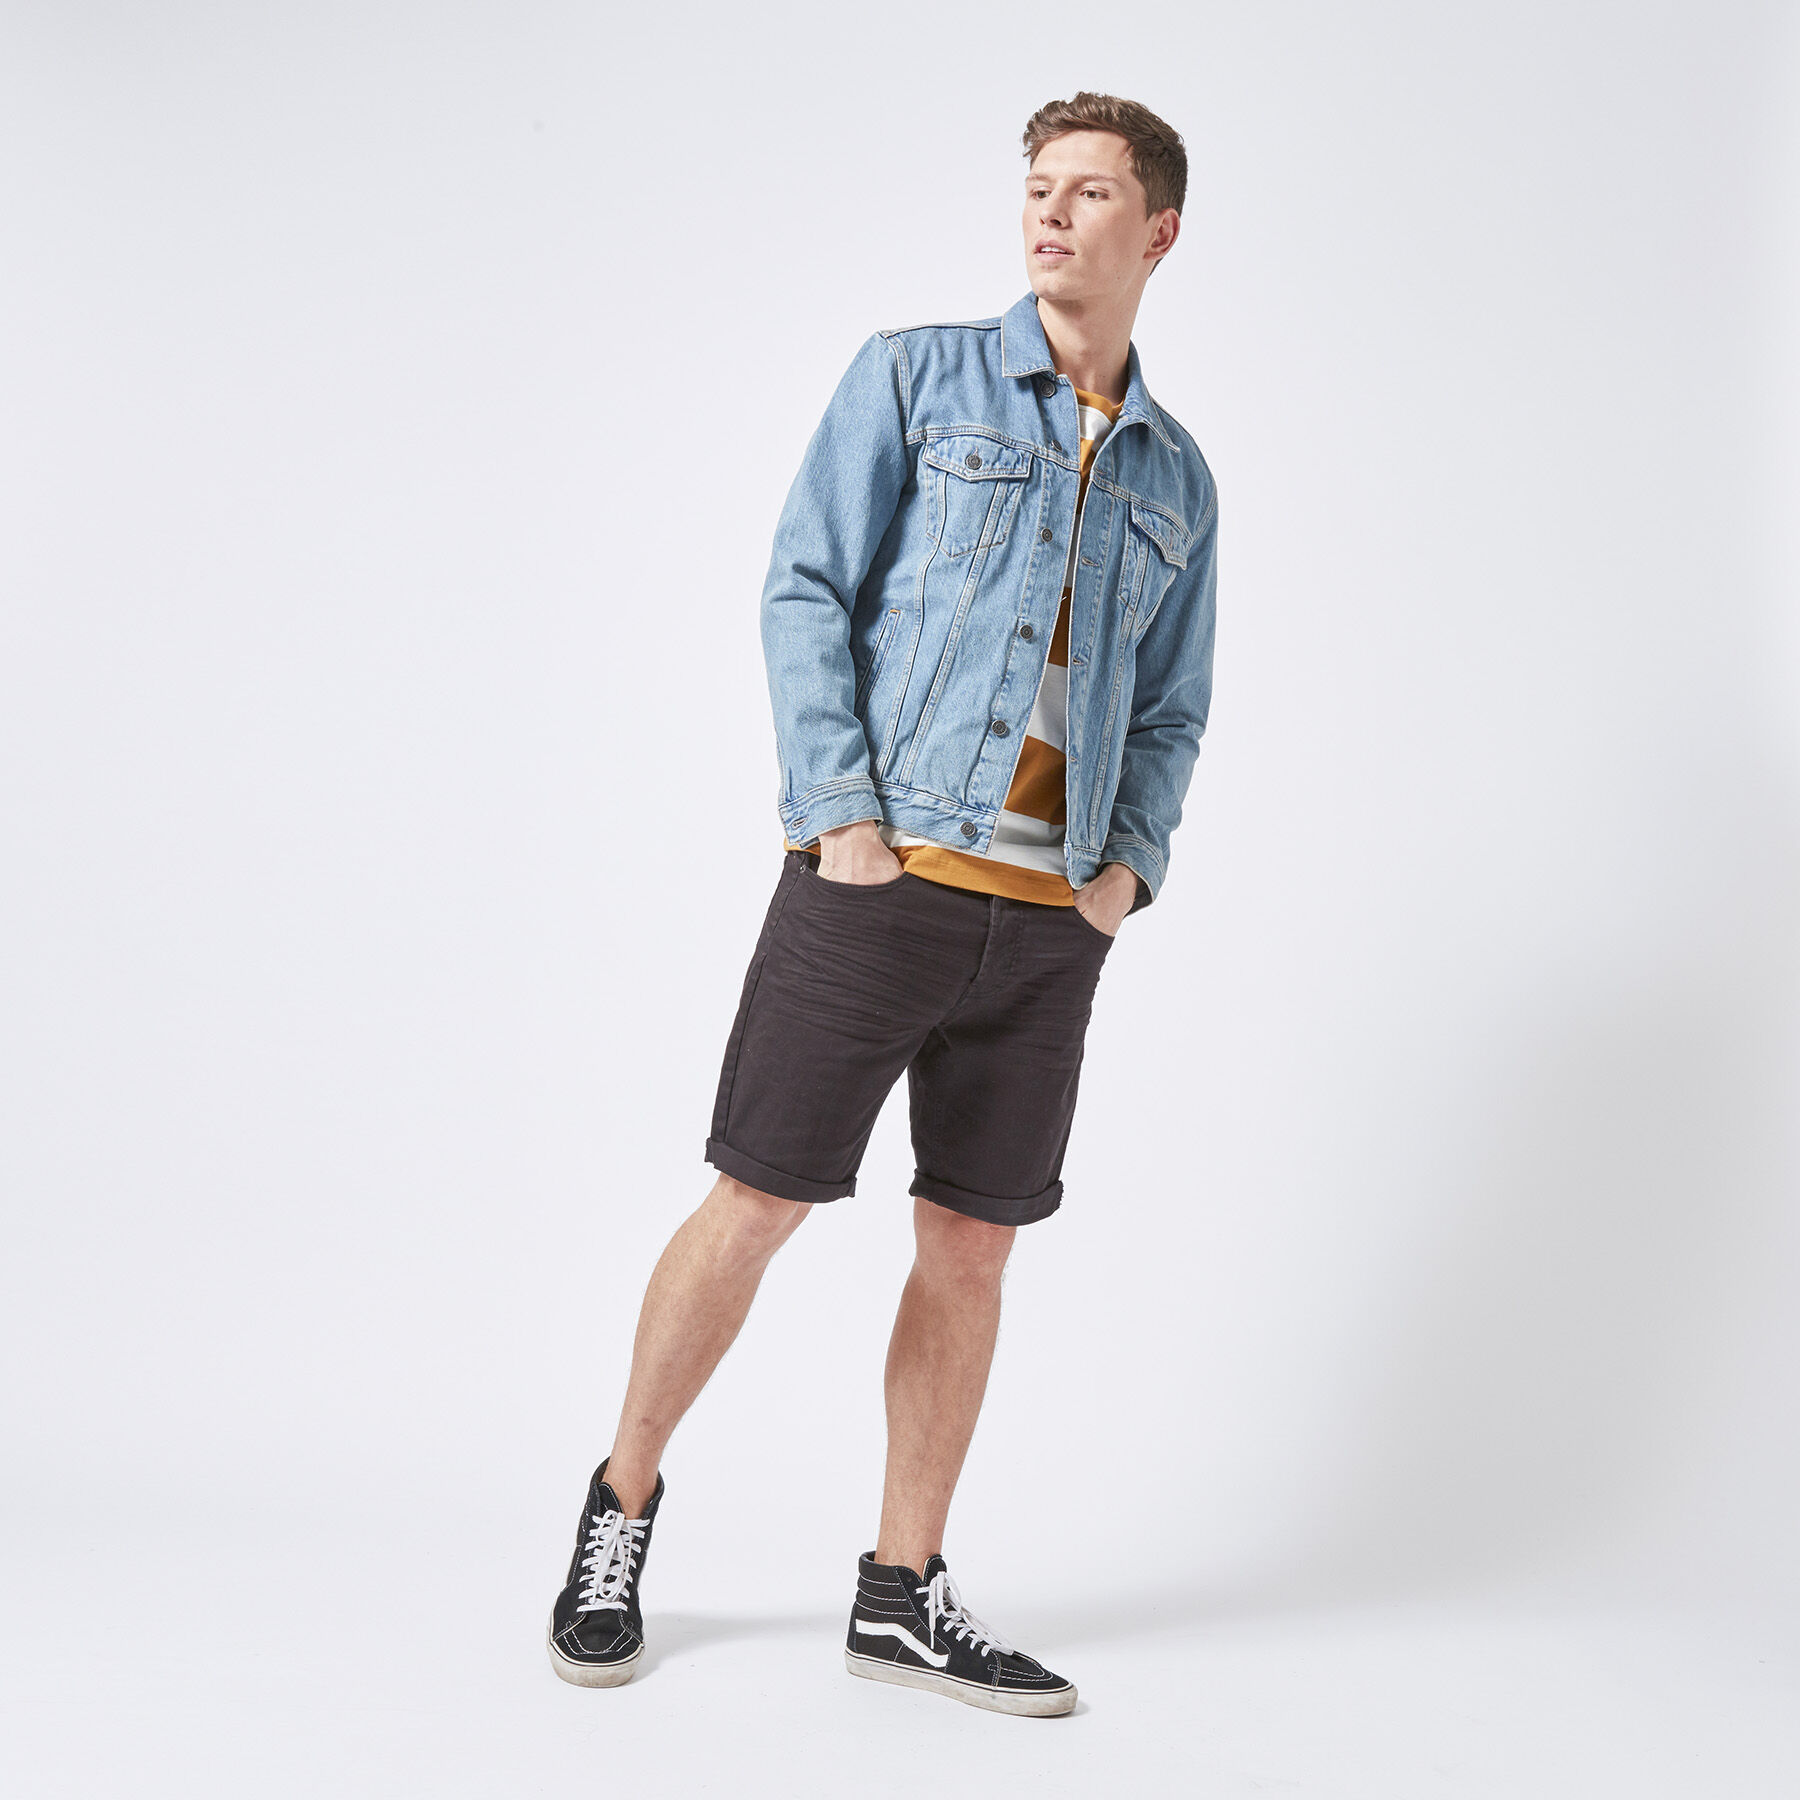 jean jacket with shorts men